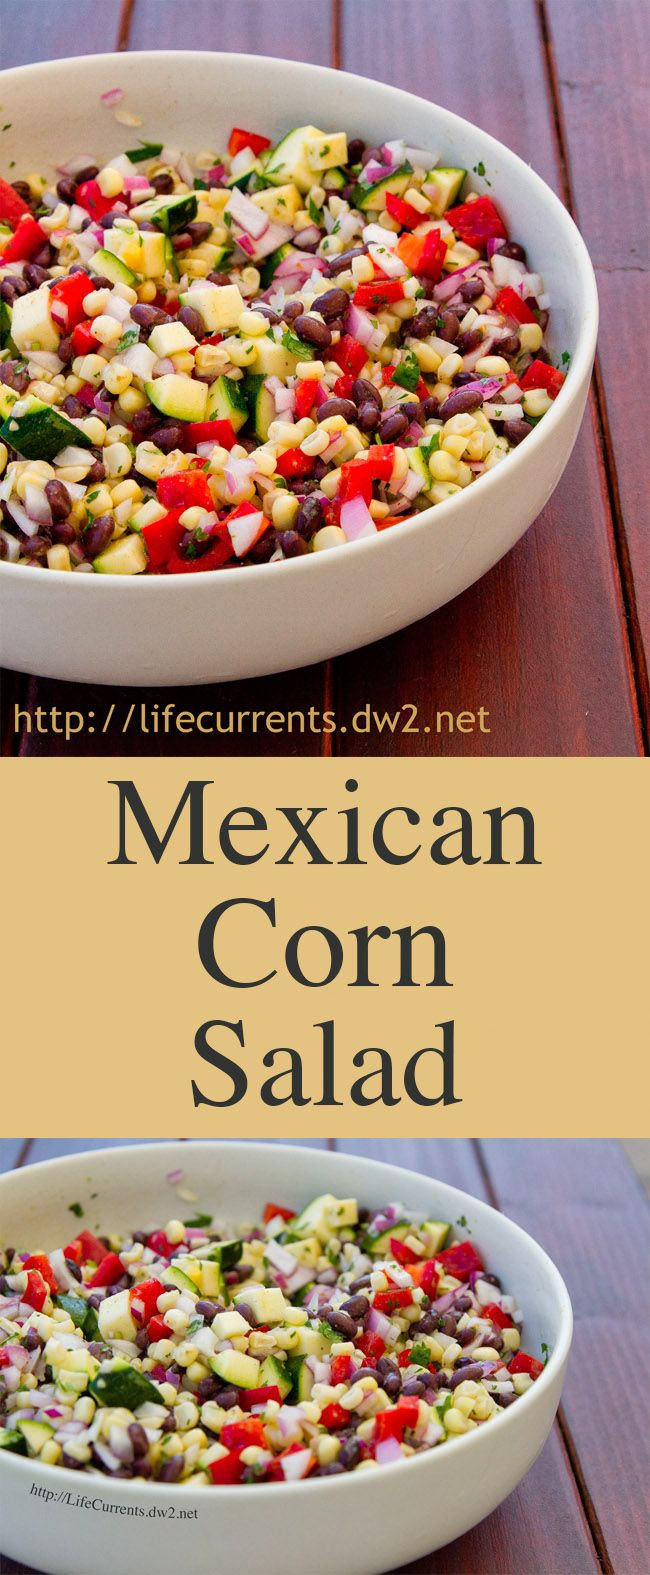 Healthy Mexican Side Dishes
 Mexican Corn Salad is a great healthy side dish or even a